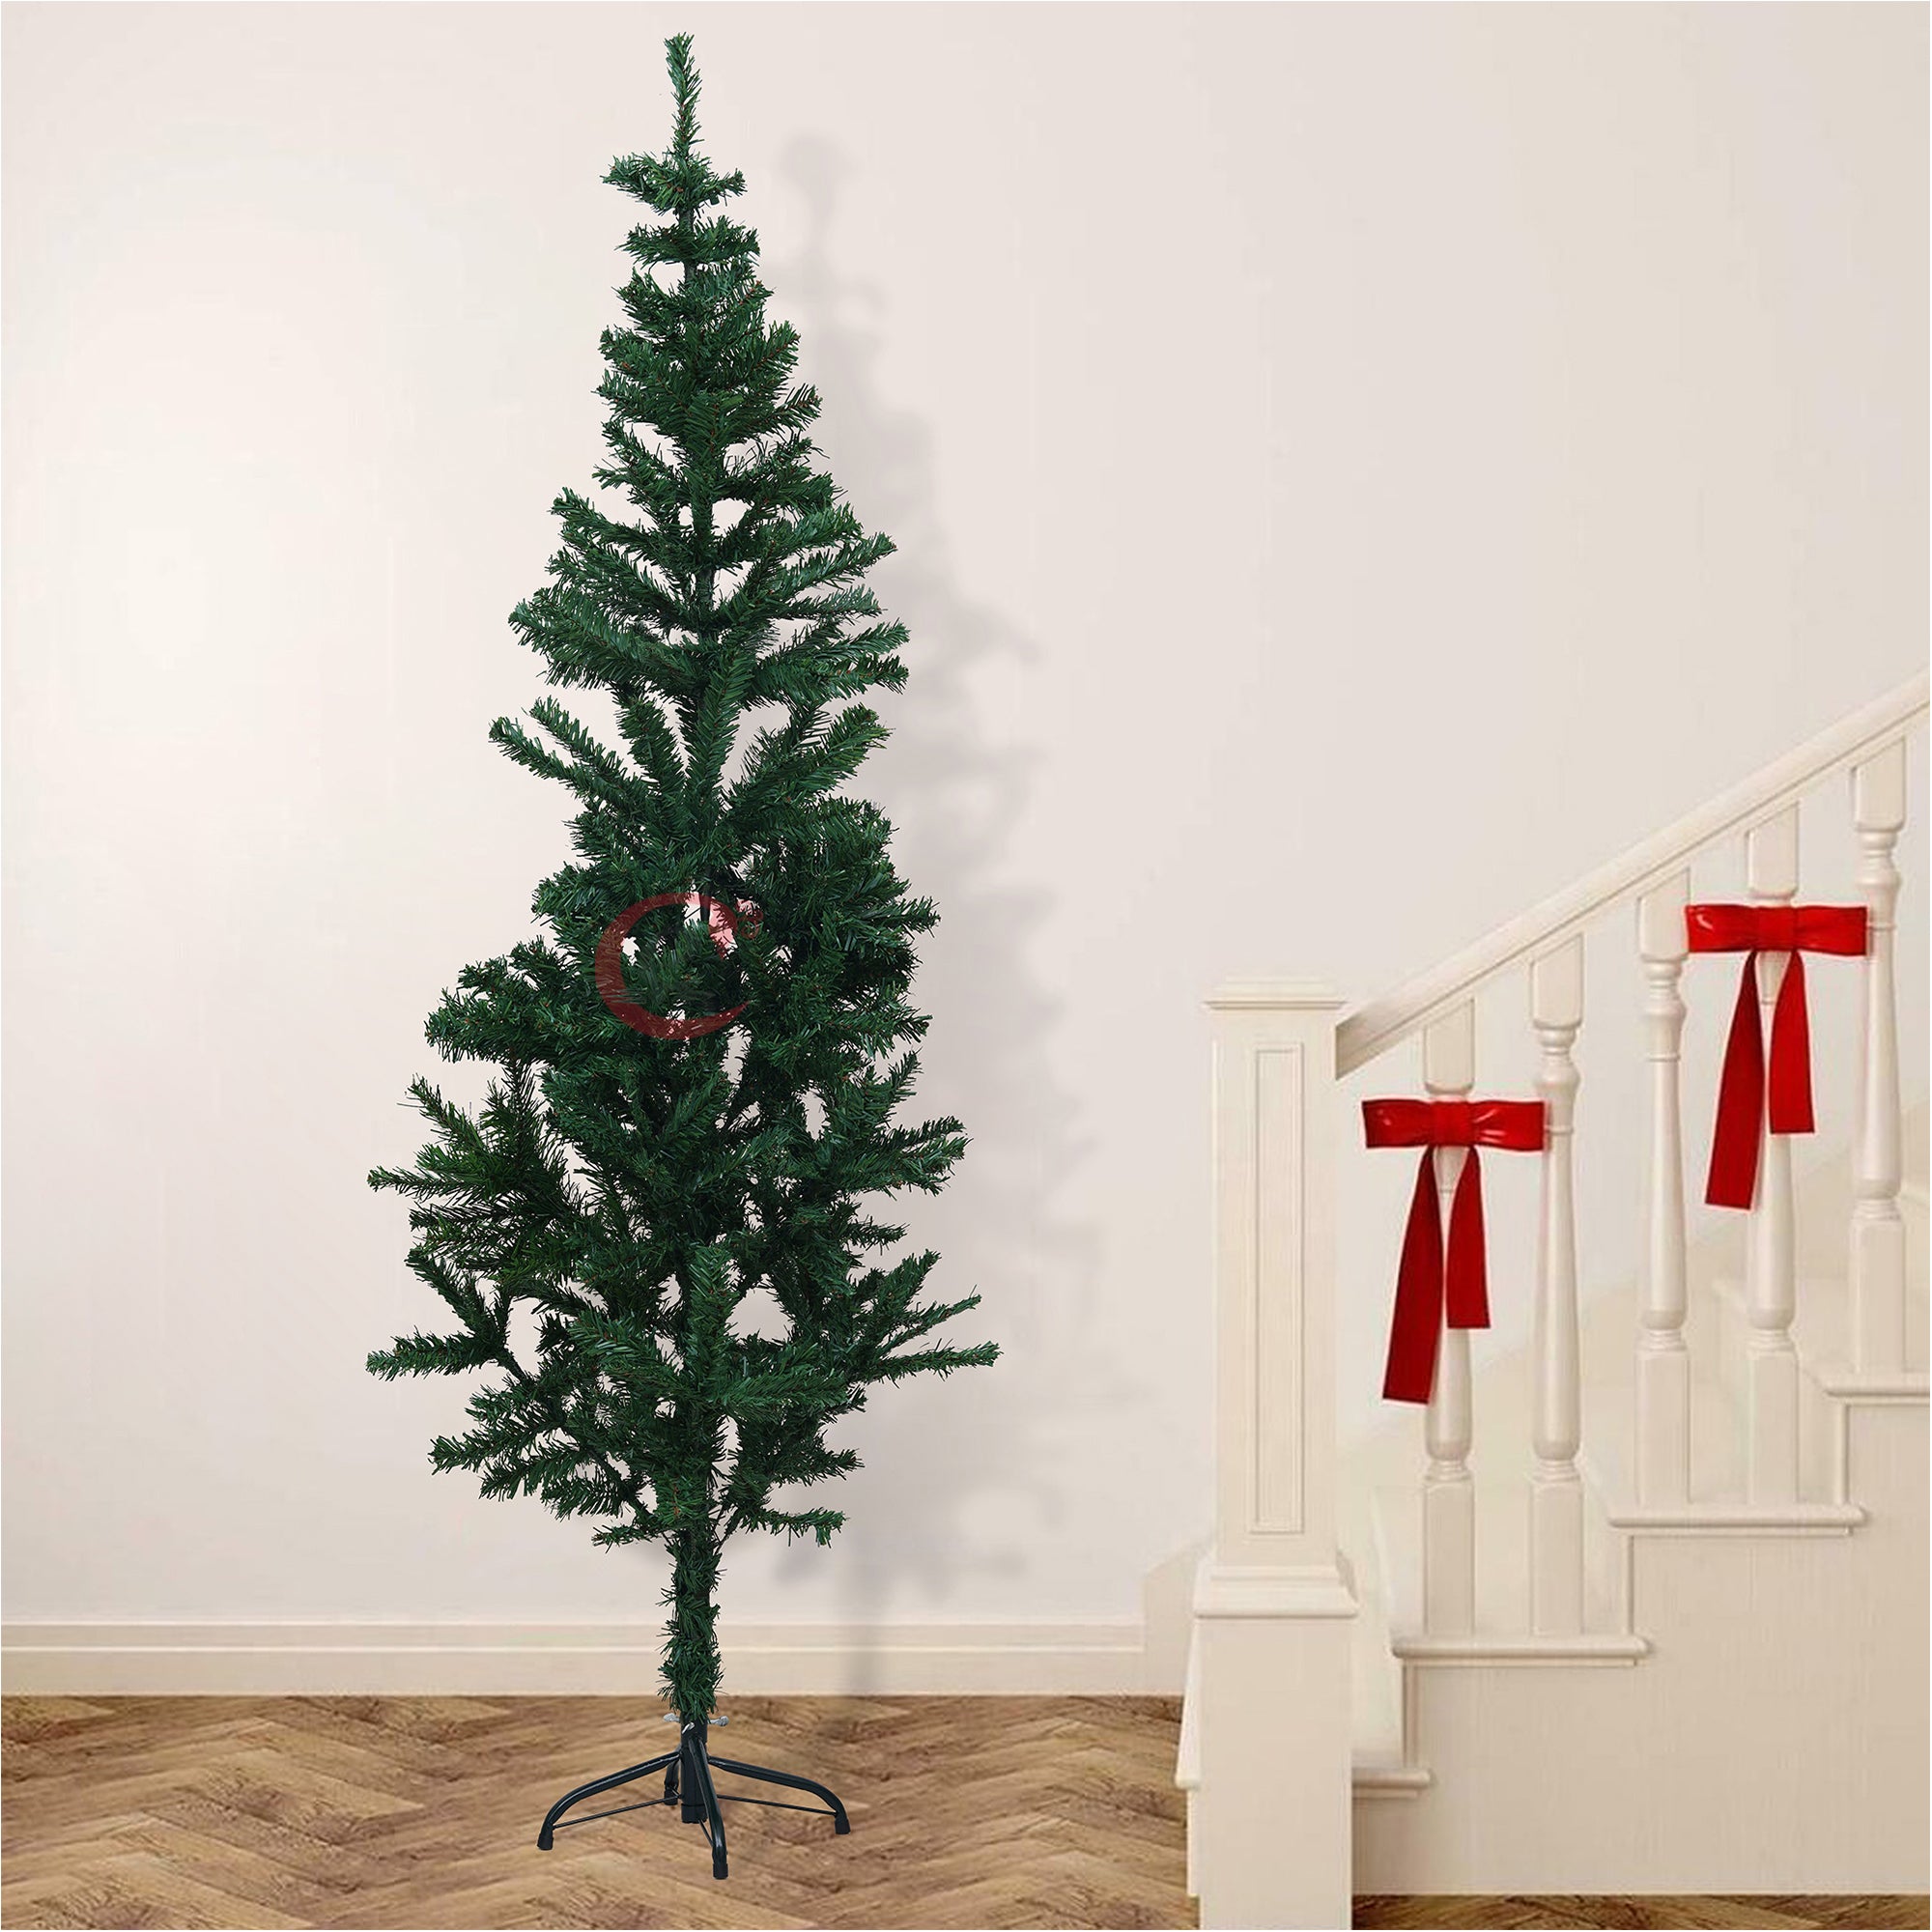 eCraftIndia 5 Feet Green Artificial Christmas Tree Xmas Pine Tree with Stand and 100 Christmas Decoration Ornaments Props - Merry Christmas Decoration Item for Home, Office, and Church 4